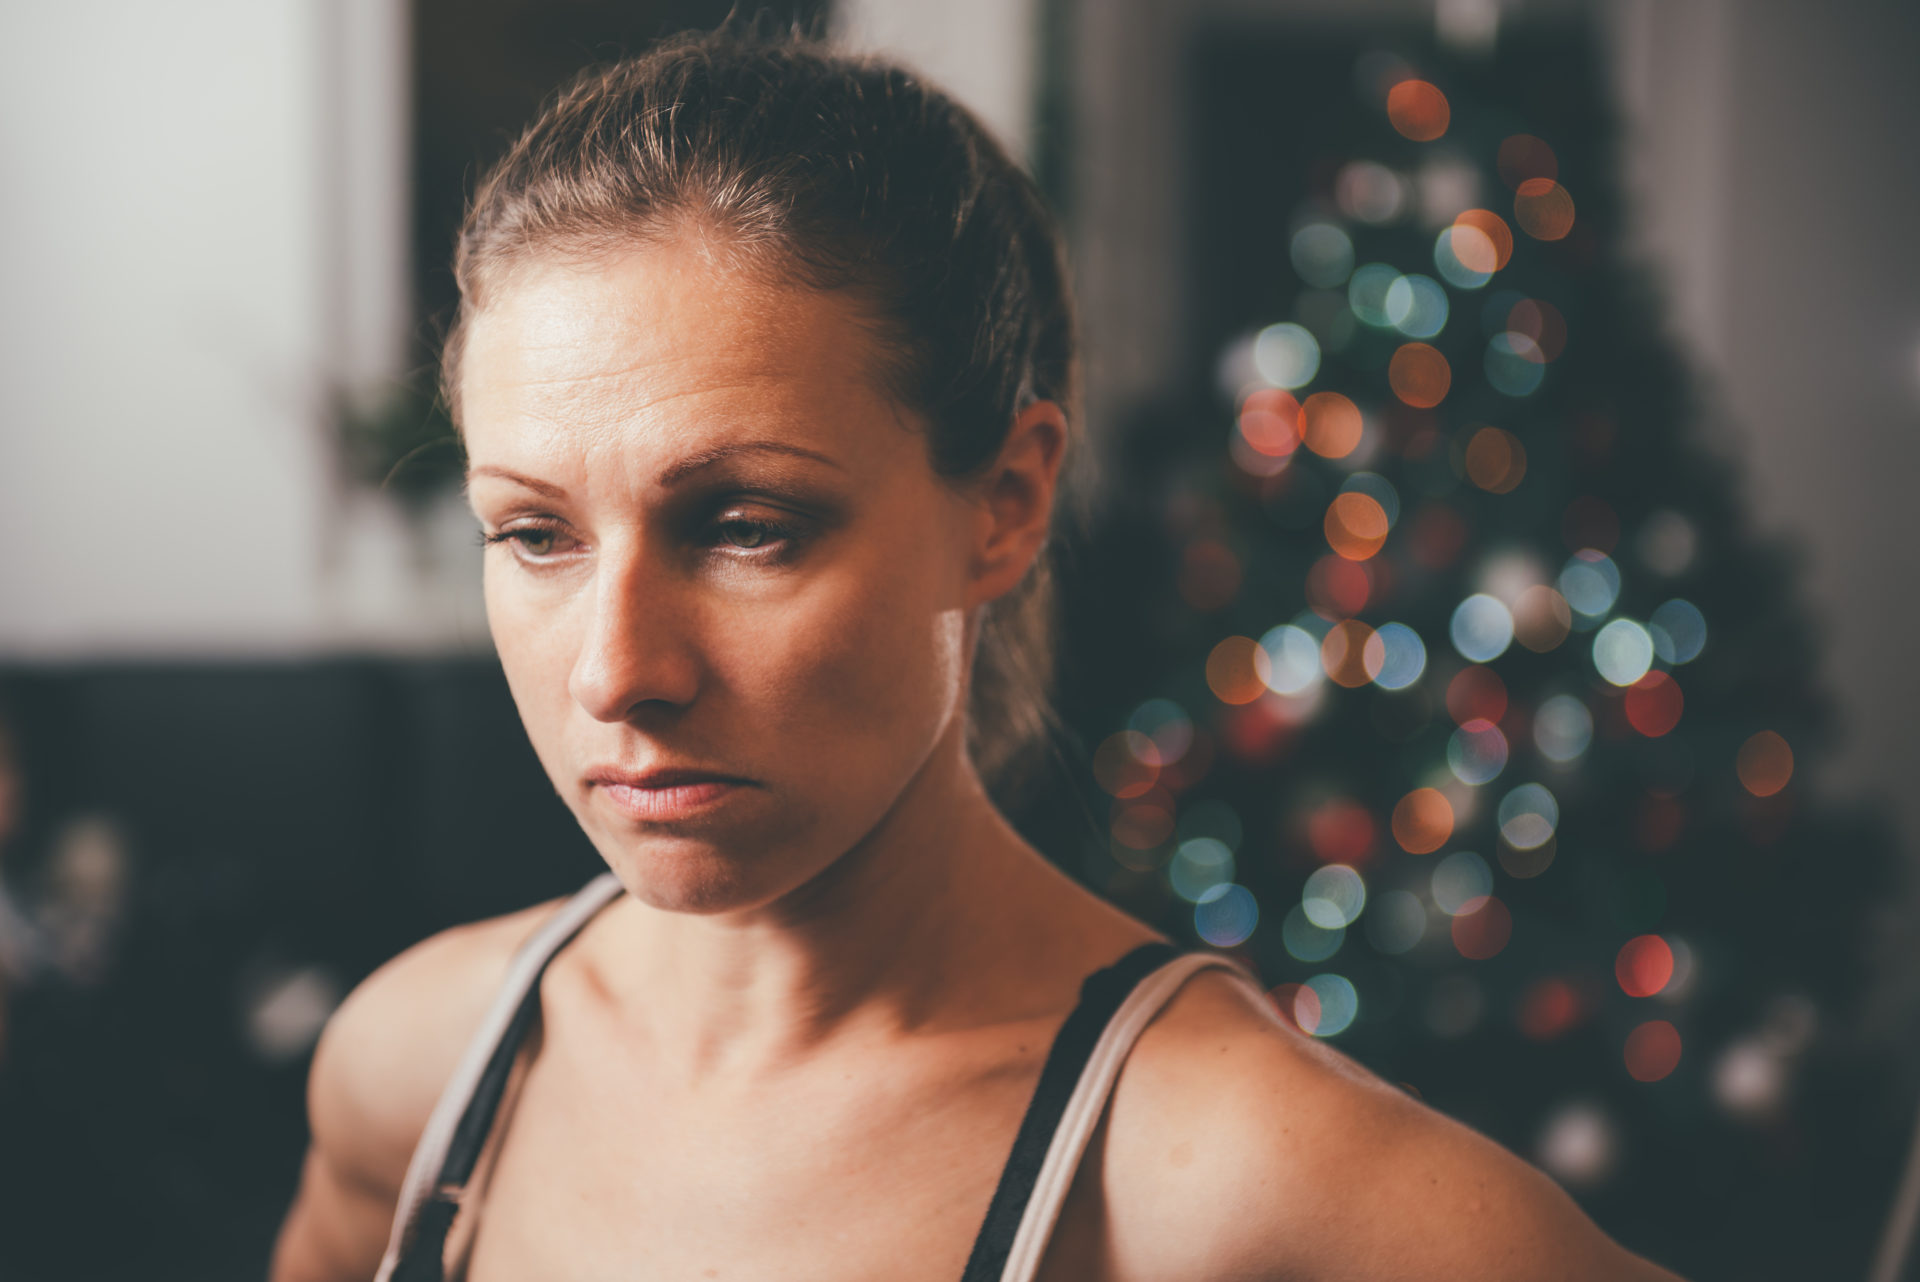 A woman is dealing with addiction during the holidays